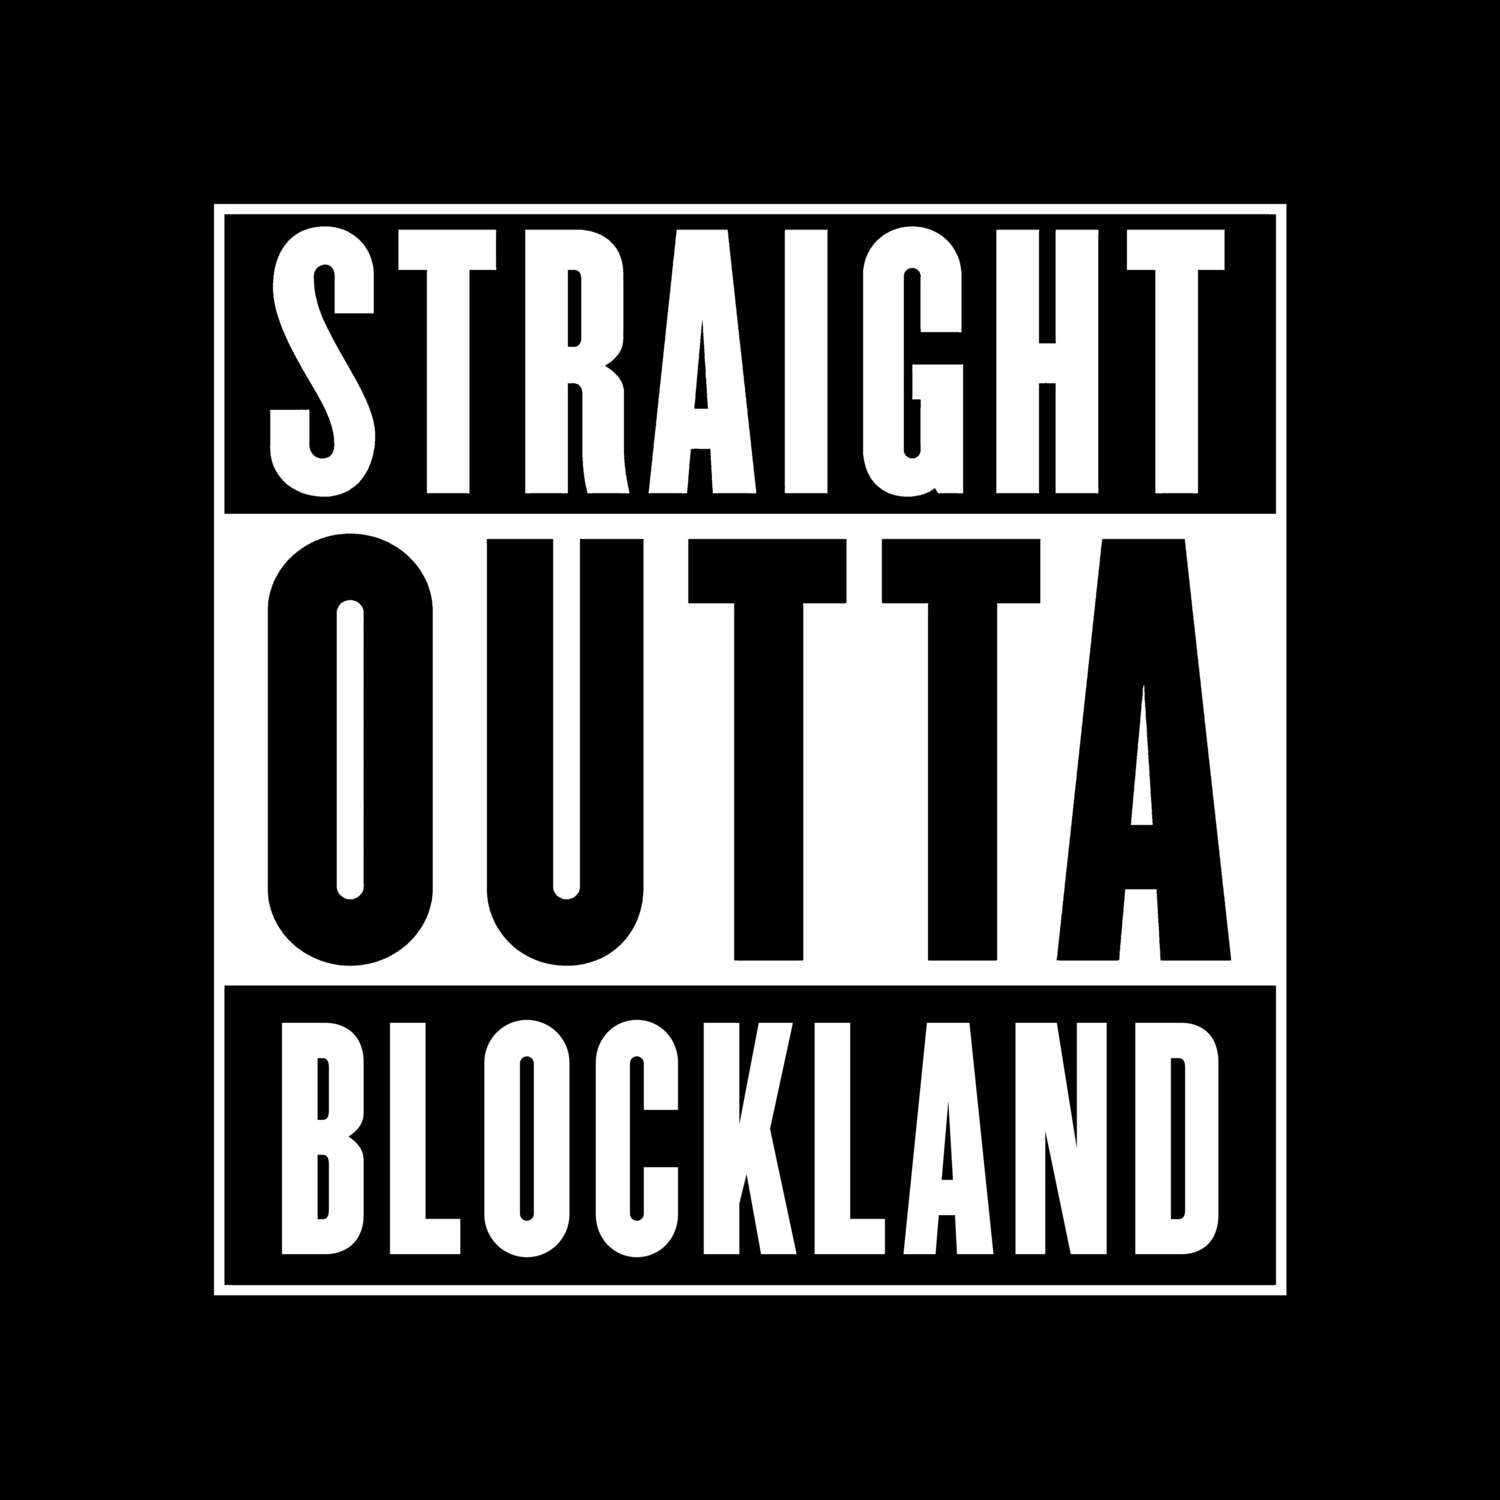 Blockland T-Shirt »Straight Outta«